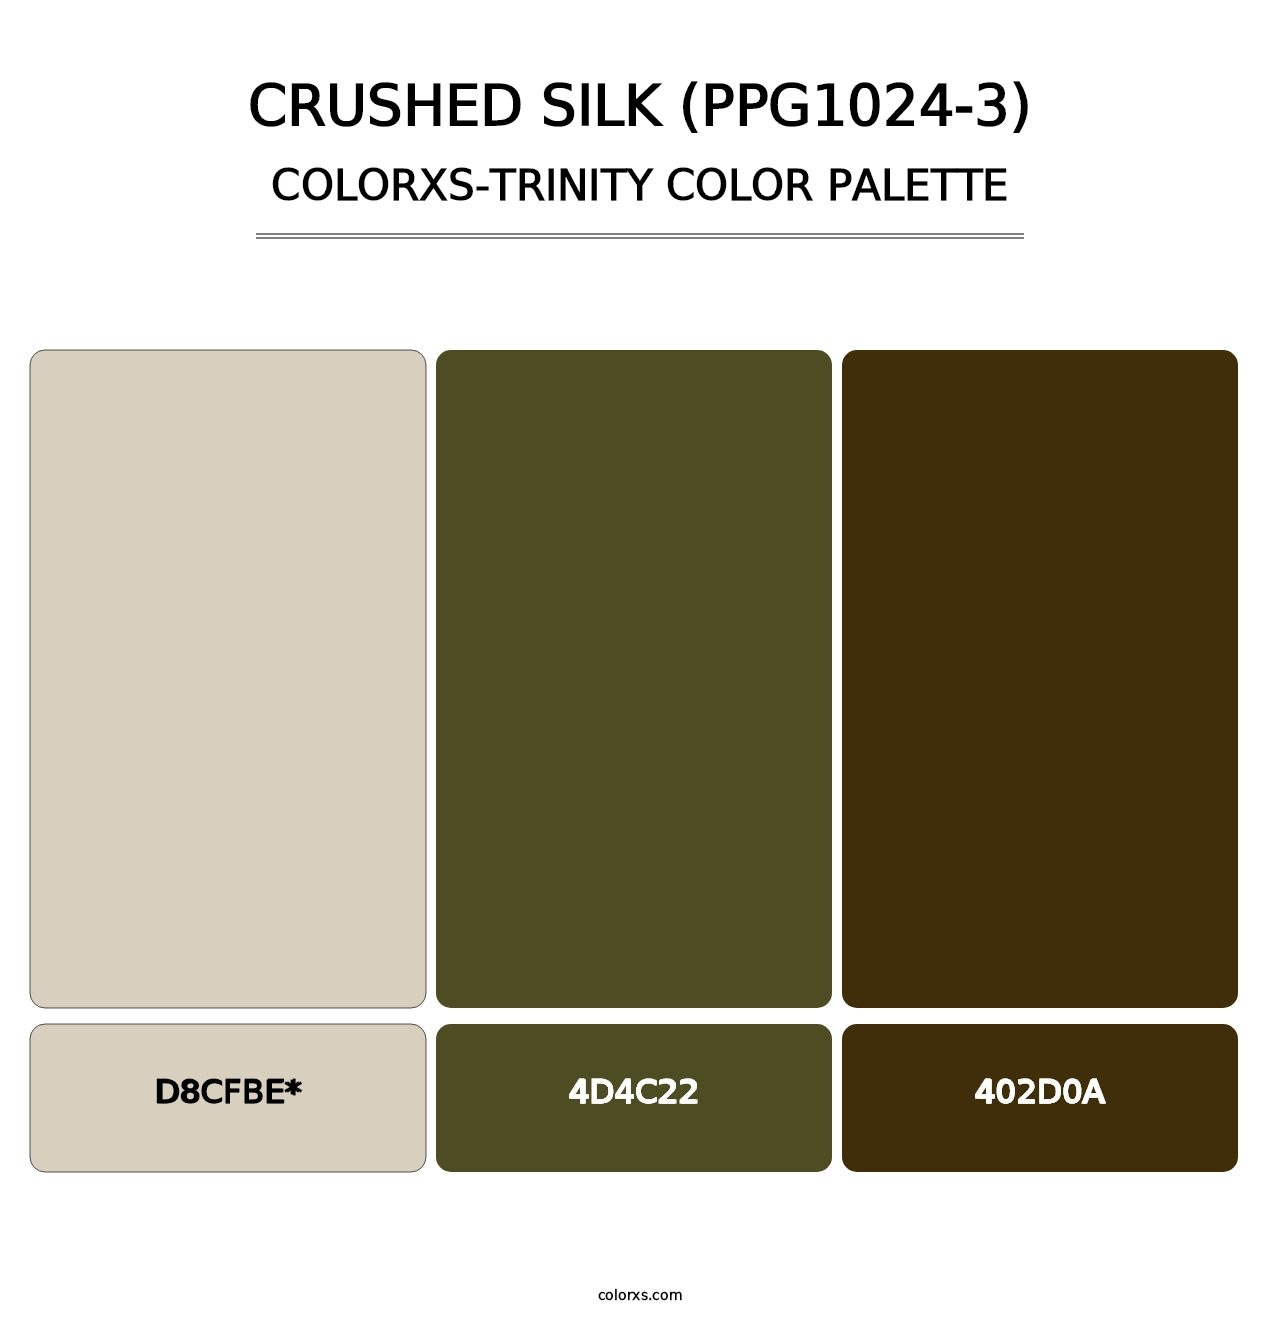 Crushed Silk (PPG1024-3) - Colorxs Trinity Palette